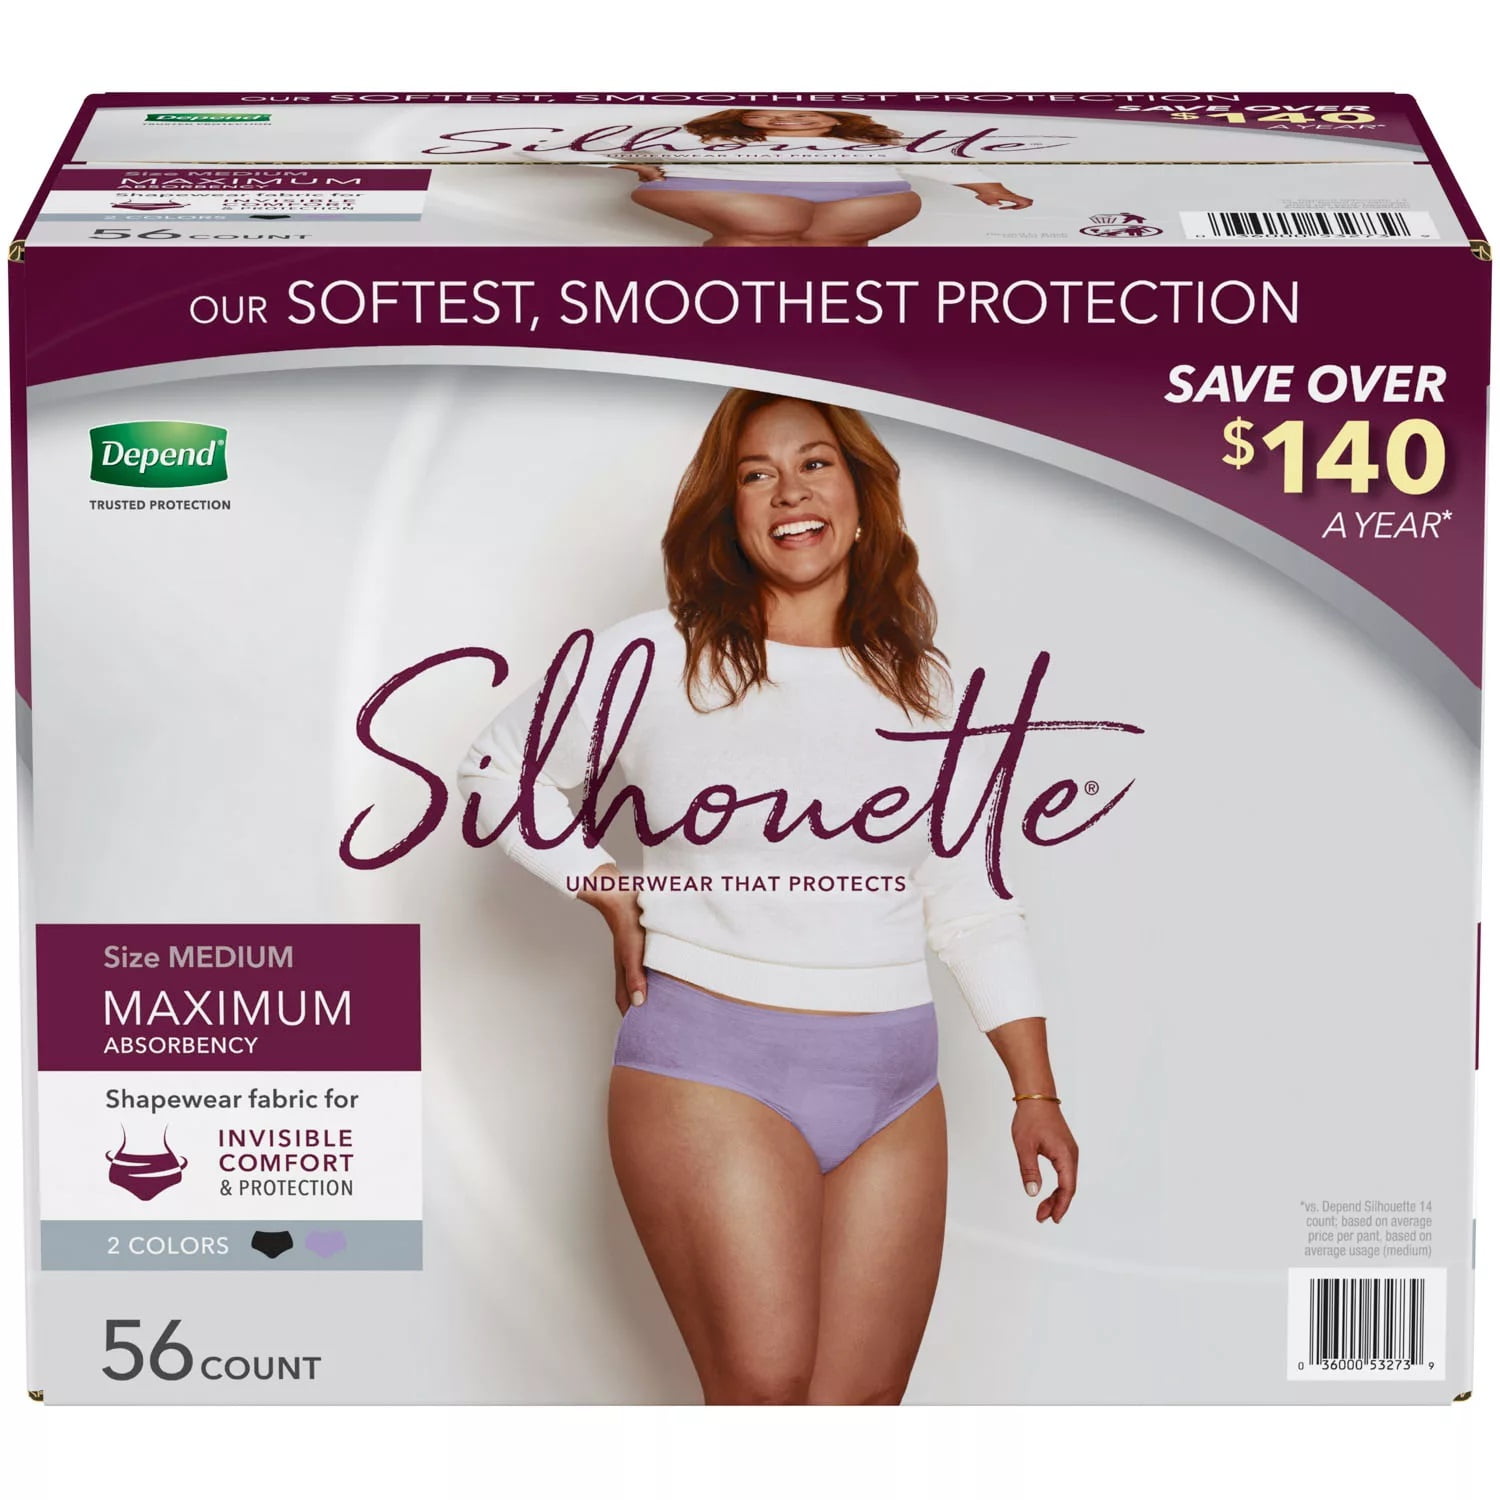 3 x DEPEND Silhouette Underwear That Protects Fiji